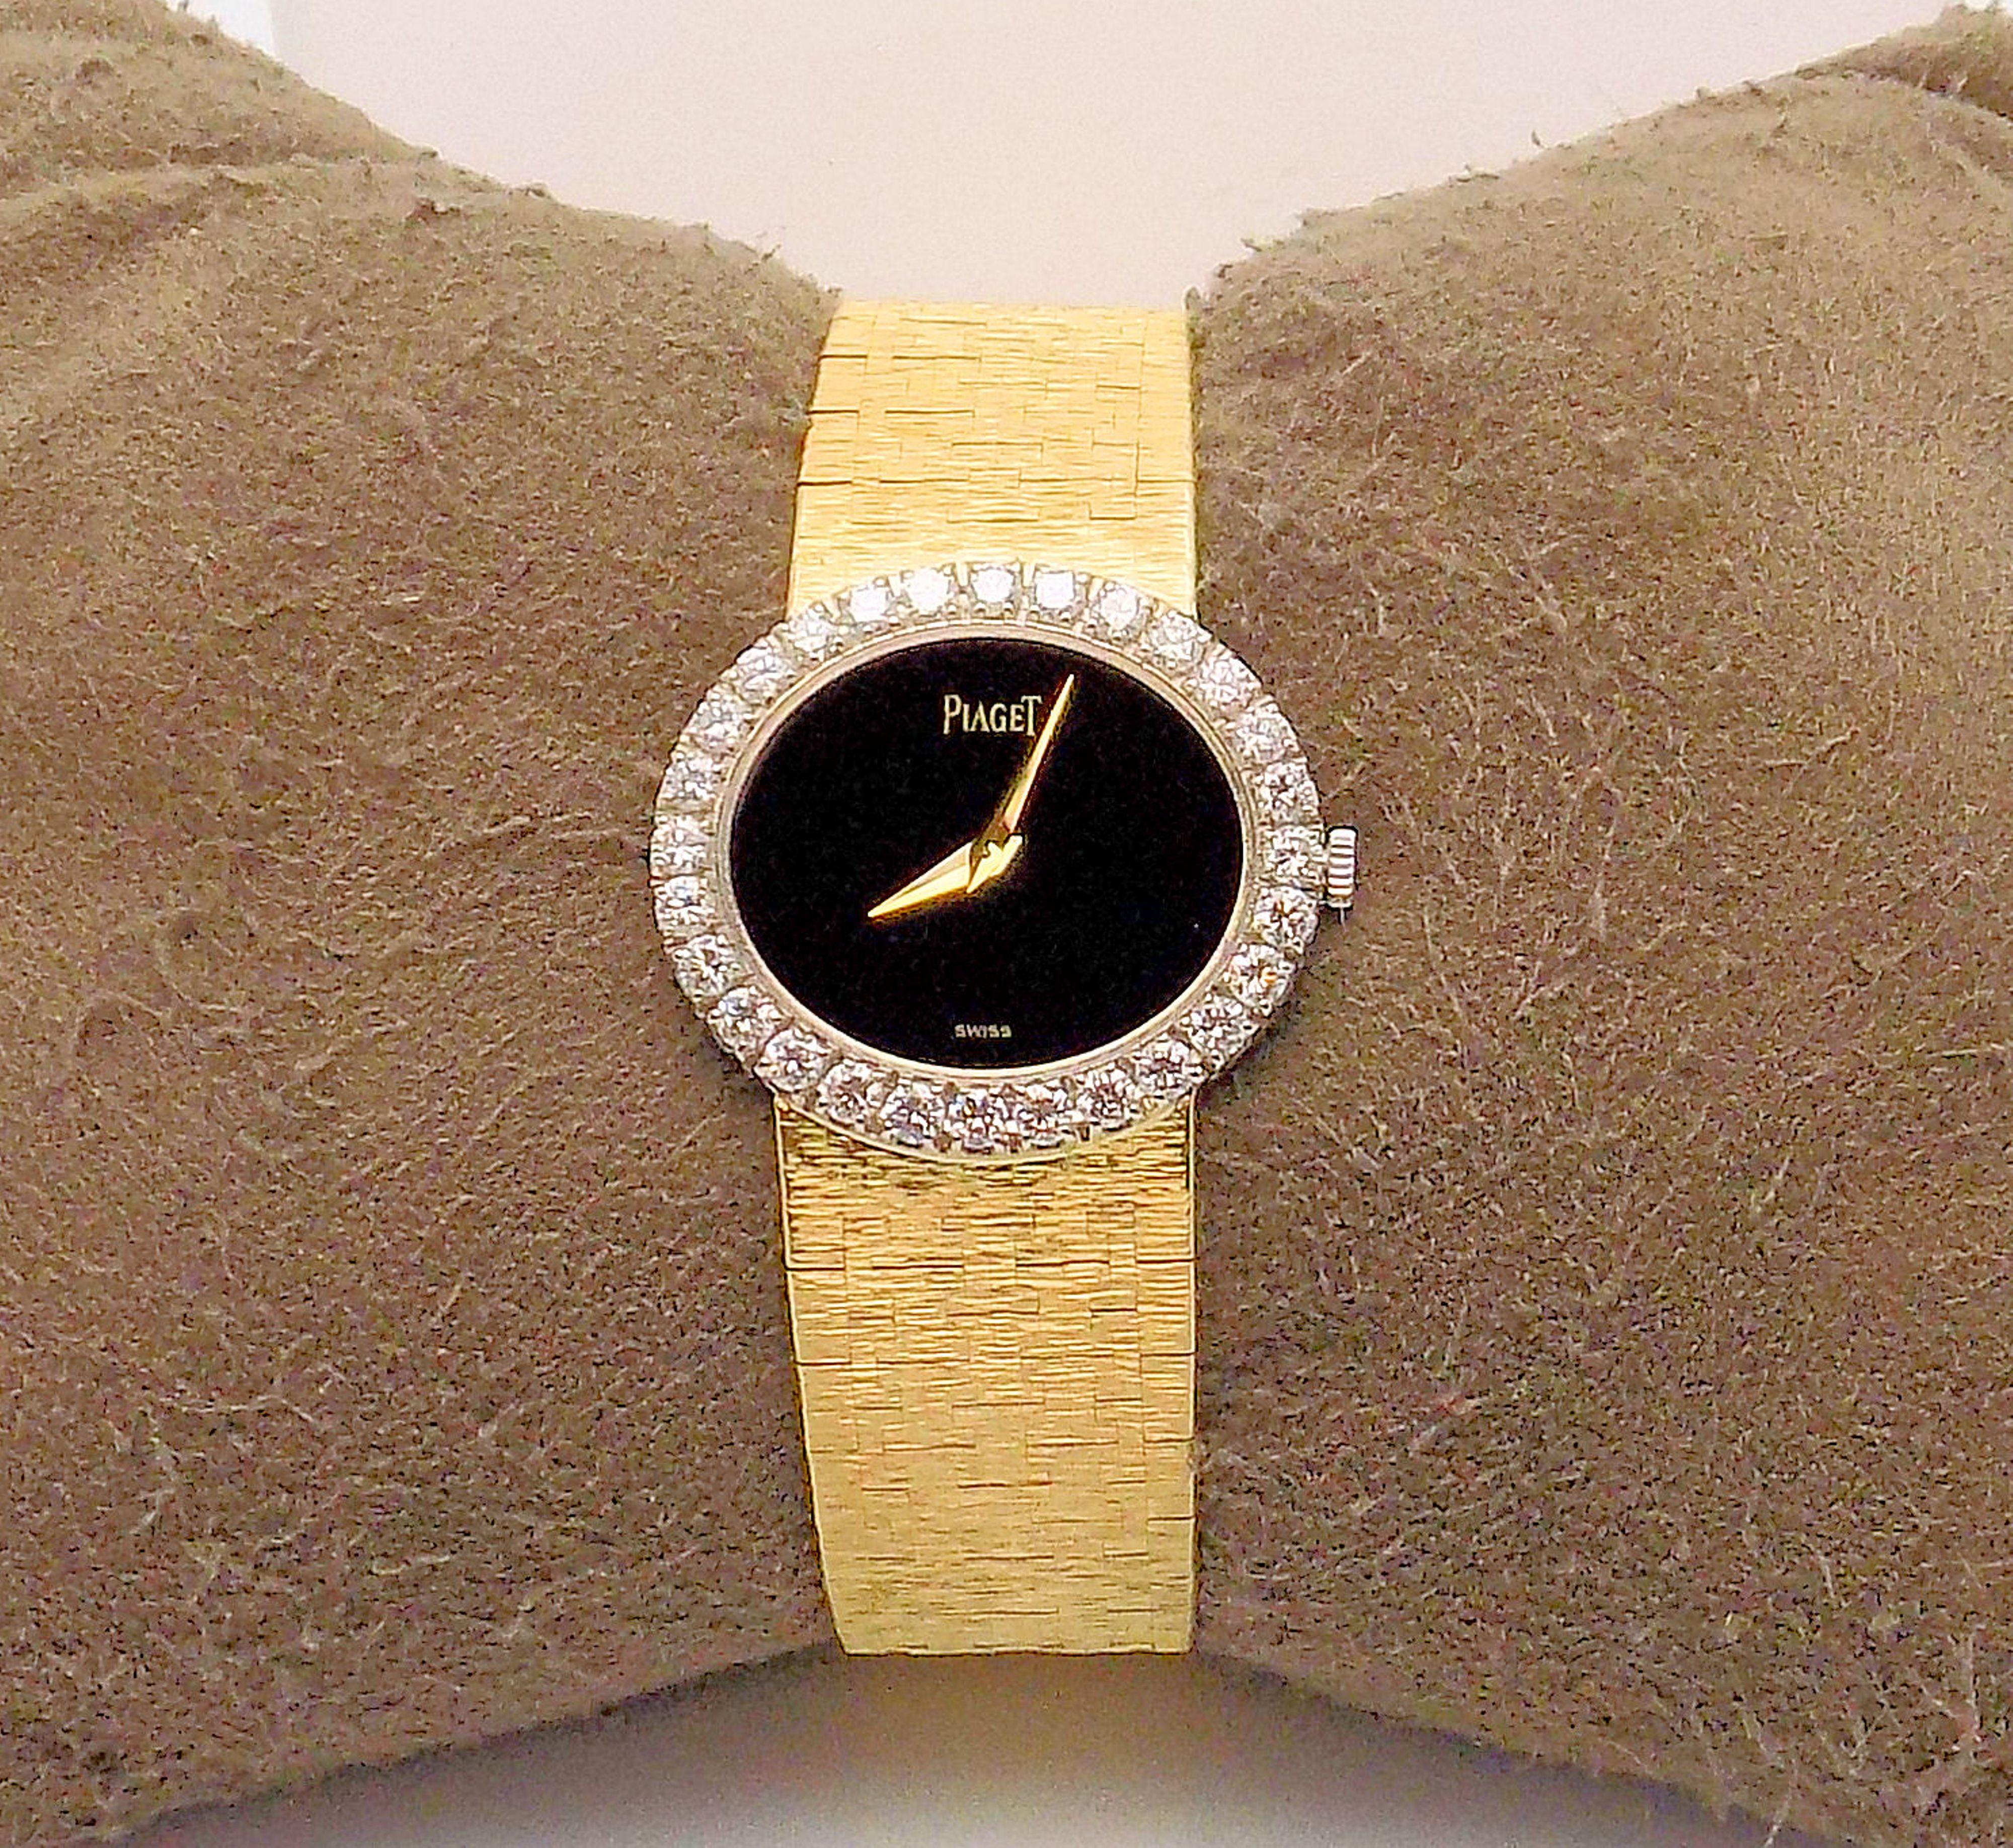 Exquisite 18 Karat Yellow Gold Lady's Stone Dial Piaget Wrist Watch; Jewel Movement; Black Onyx Dial and Restoration by Piaget; Case: 26 X 24 MM; 28 Round Brilliant Diamonds 2.00 Carat Total Weight; VVS-2, F; P-9 Textured Tapered Bracelet;  6 3/ 8”